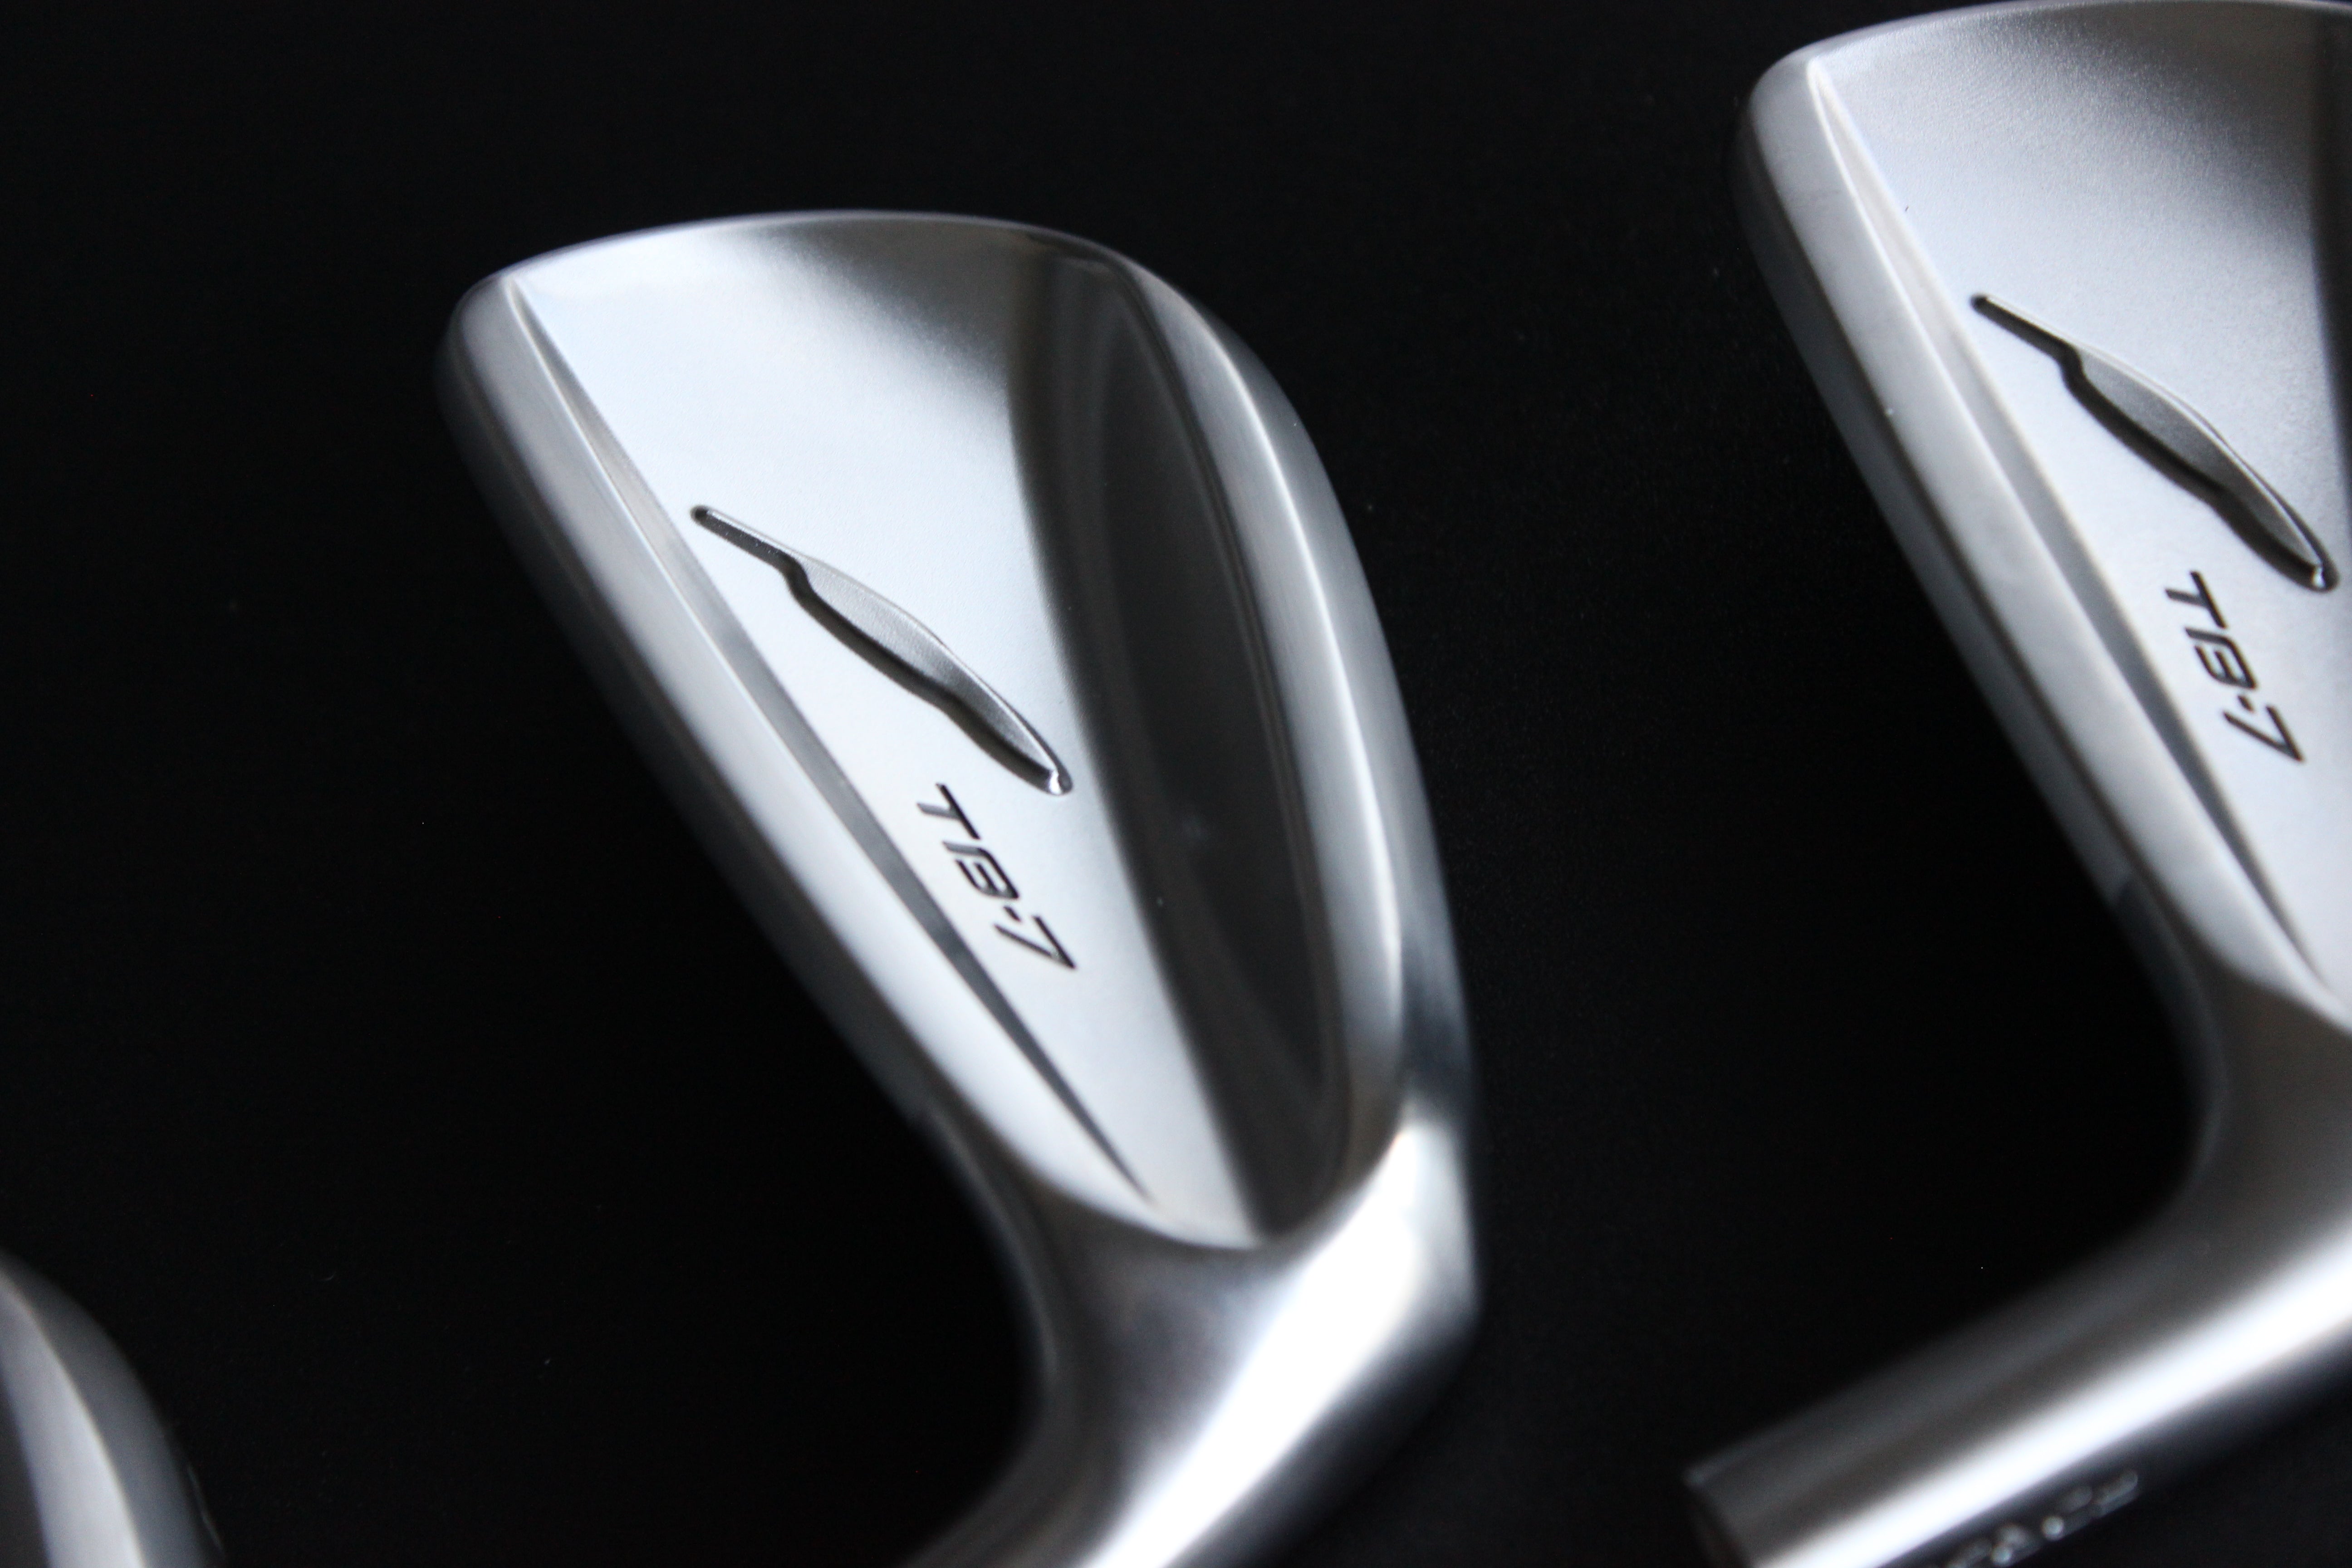 Fourteen Golf TB-7 Forged Irons